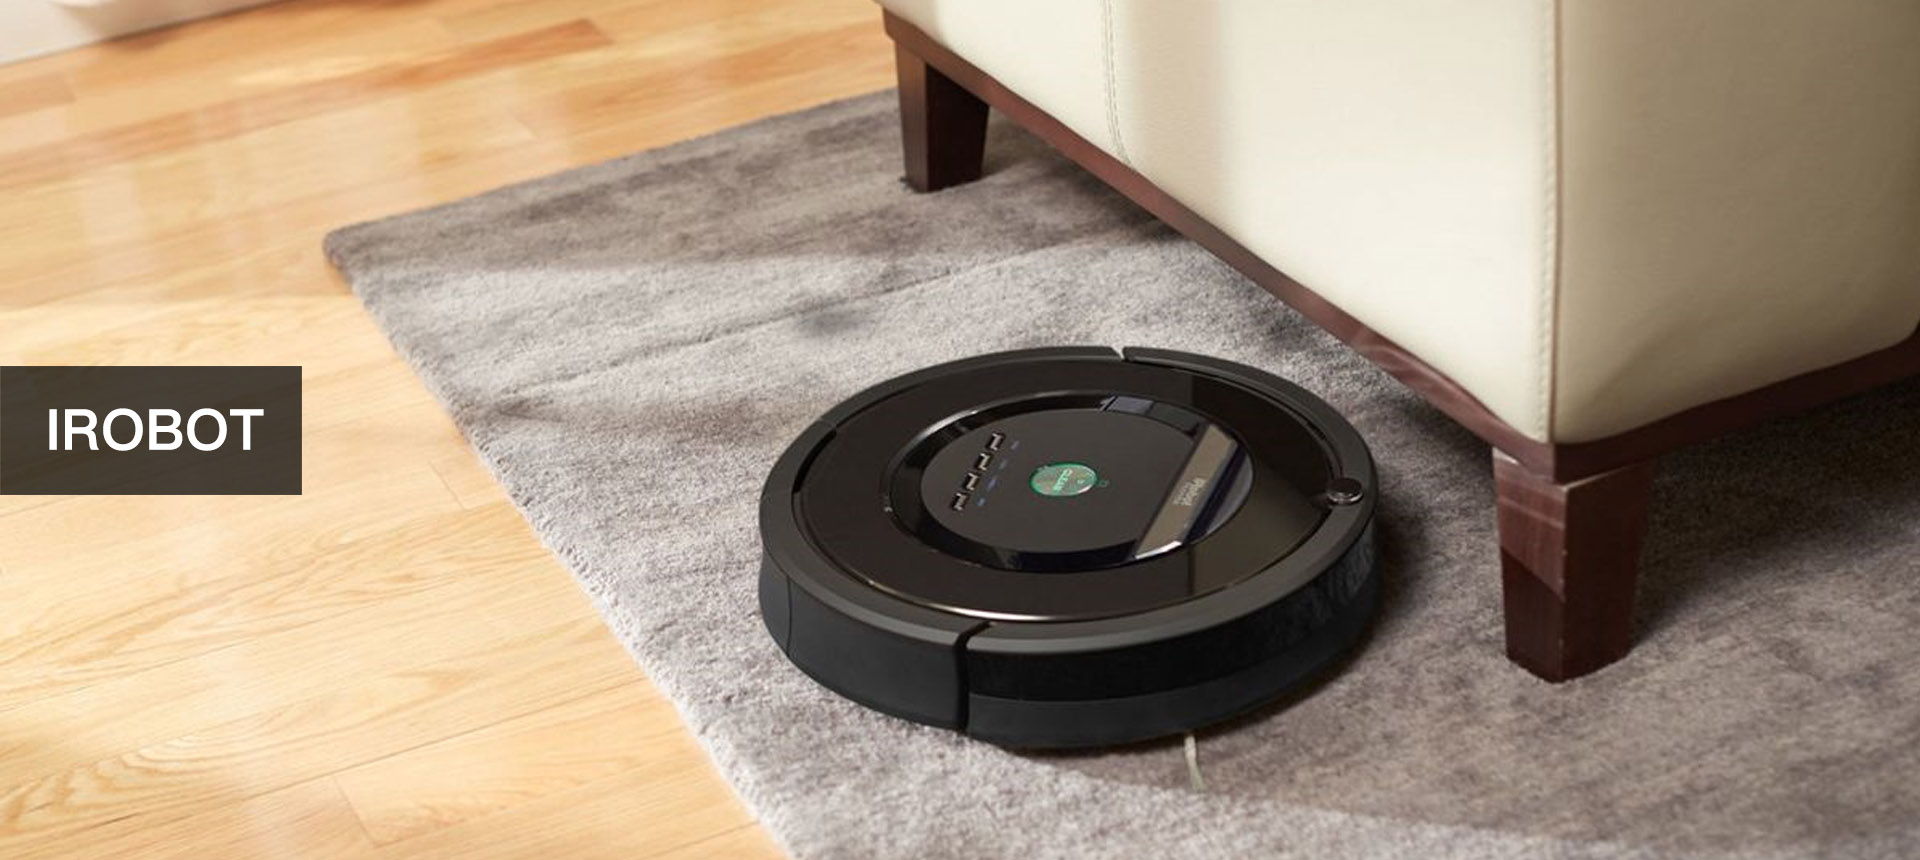 Irobot Robot Vacuum Reviews 2021 Which, Is A Roomba Good For Hardwood Floors